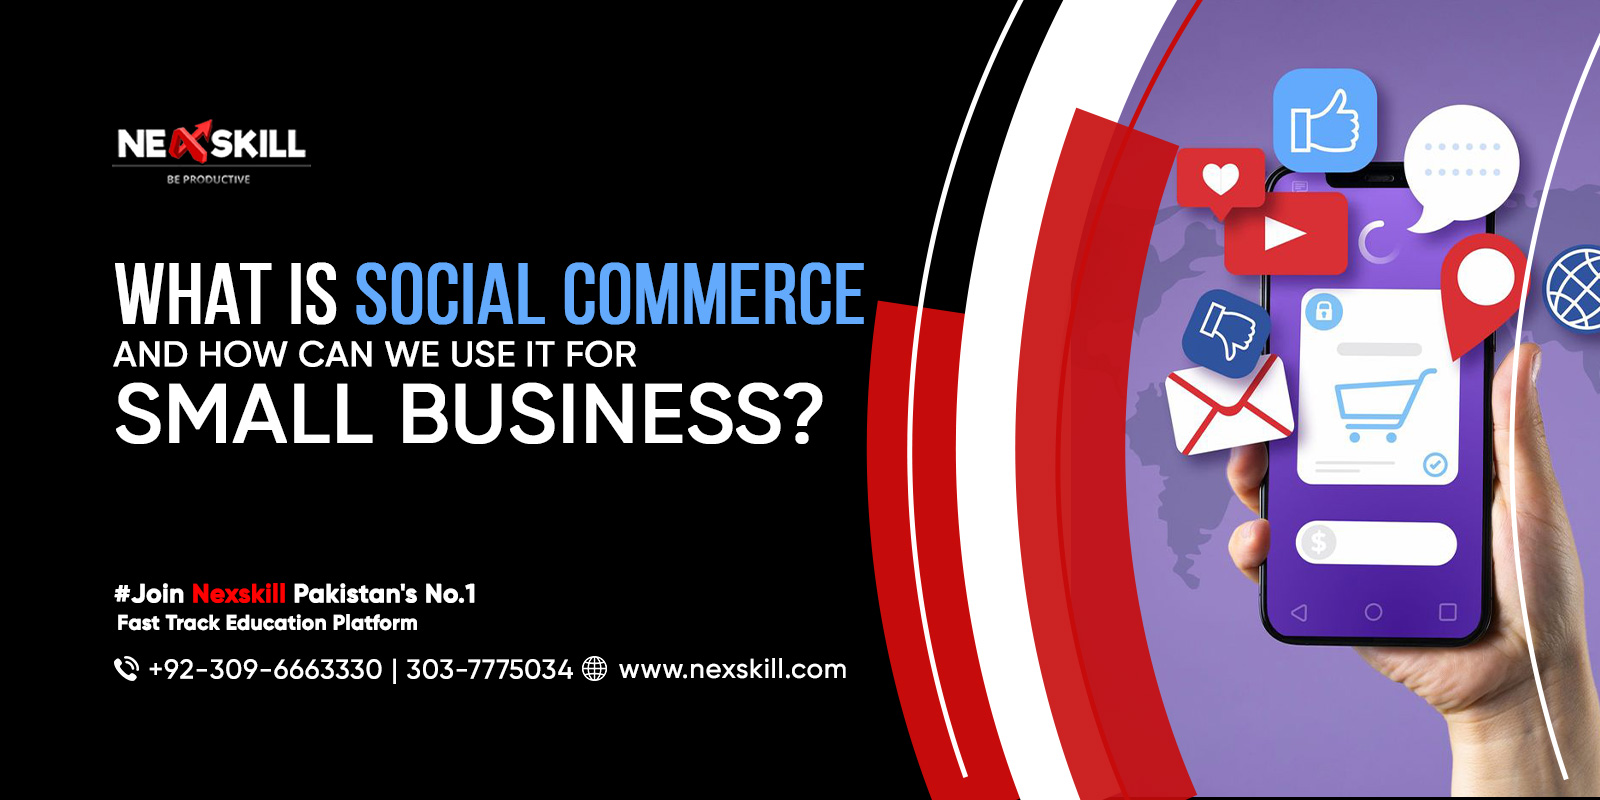 What is Social Commerce and How can we use it for small business?